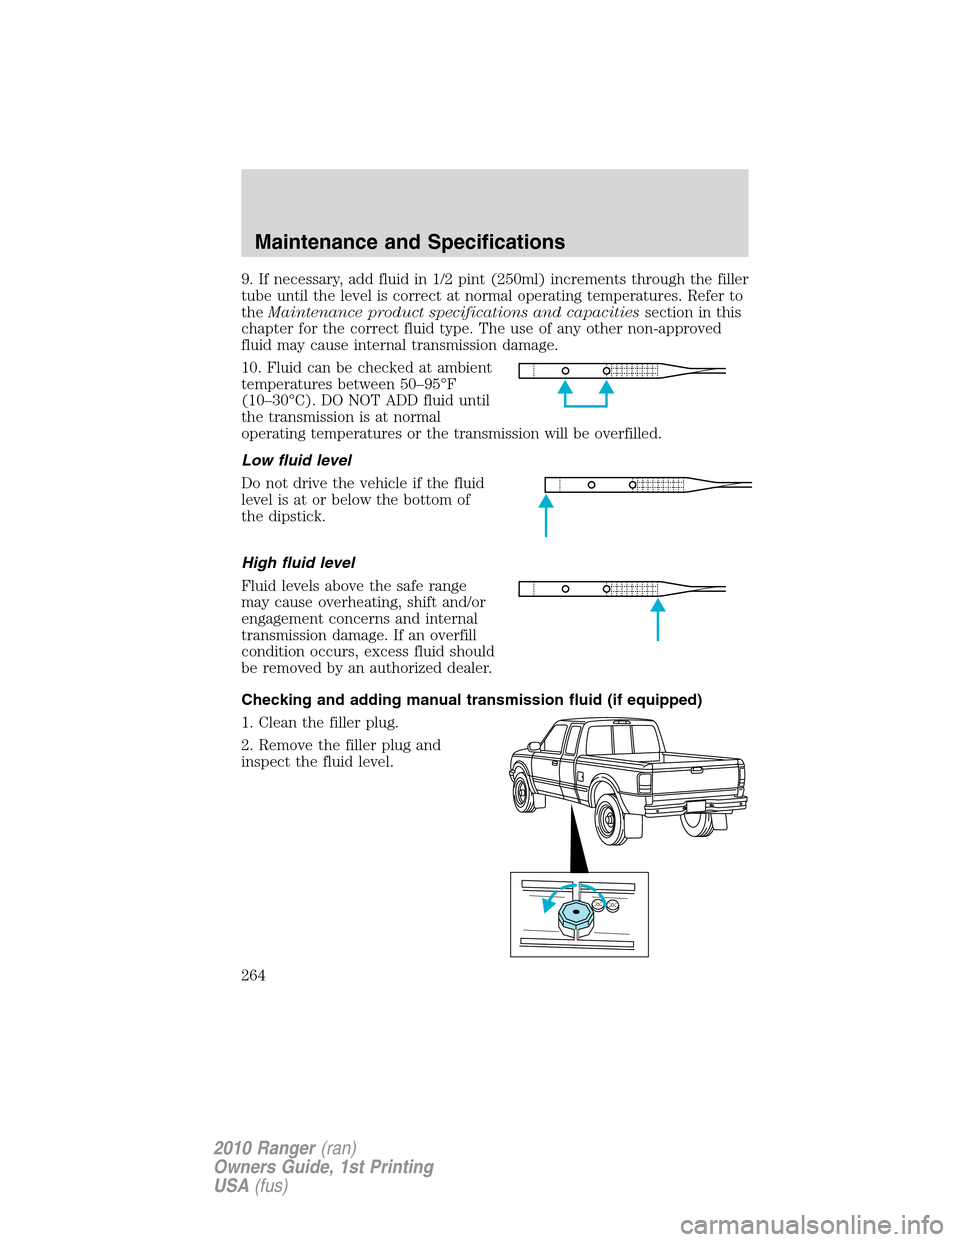 FORD RANGER 2010 2.G Service Manual 9. If necessary, add fluid in 1/2 pint (250ml) increments through the filler
tube until the level is correct at normal operating temperatures. Refer to
theMaintenance product specifications and capaci